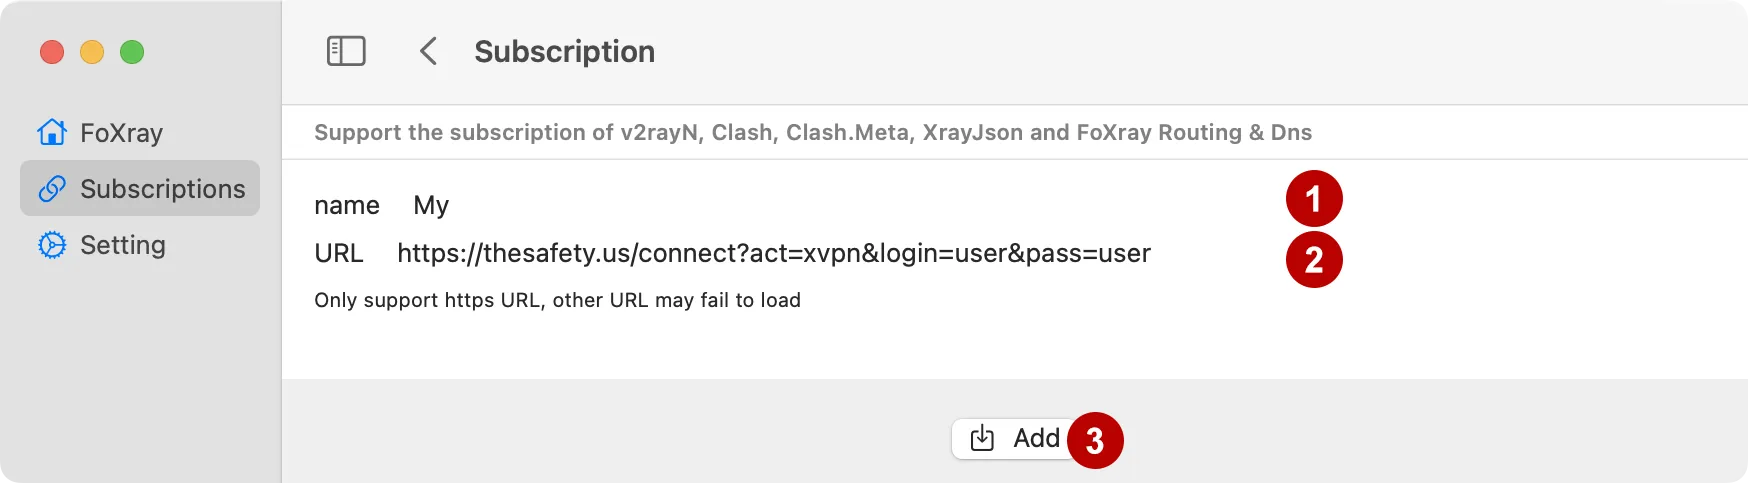 Adding a link to xVPN subscription in Foxray on macOS